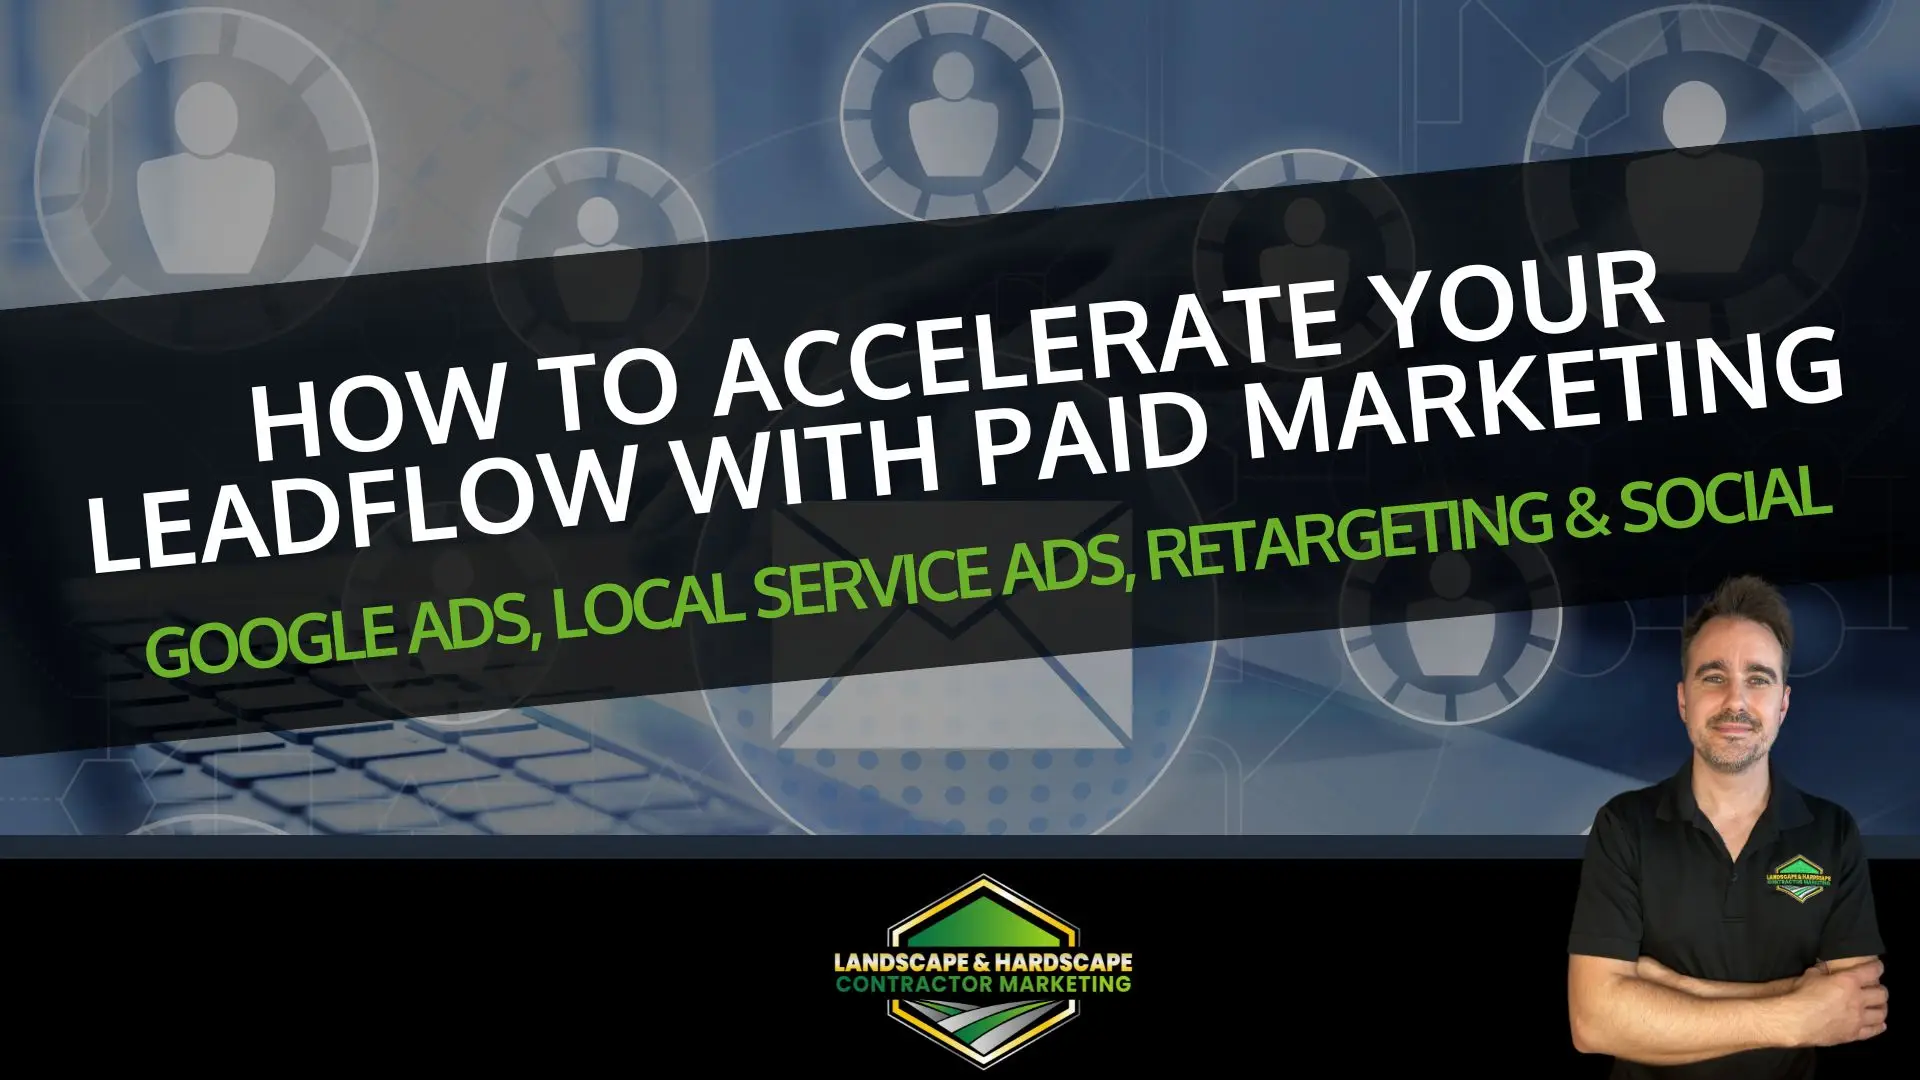 How to Accelerate Your Leadflow with Paid Marketing